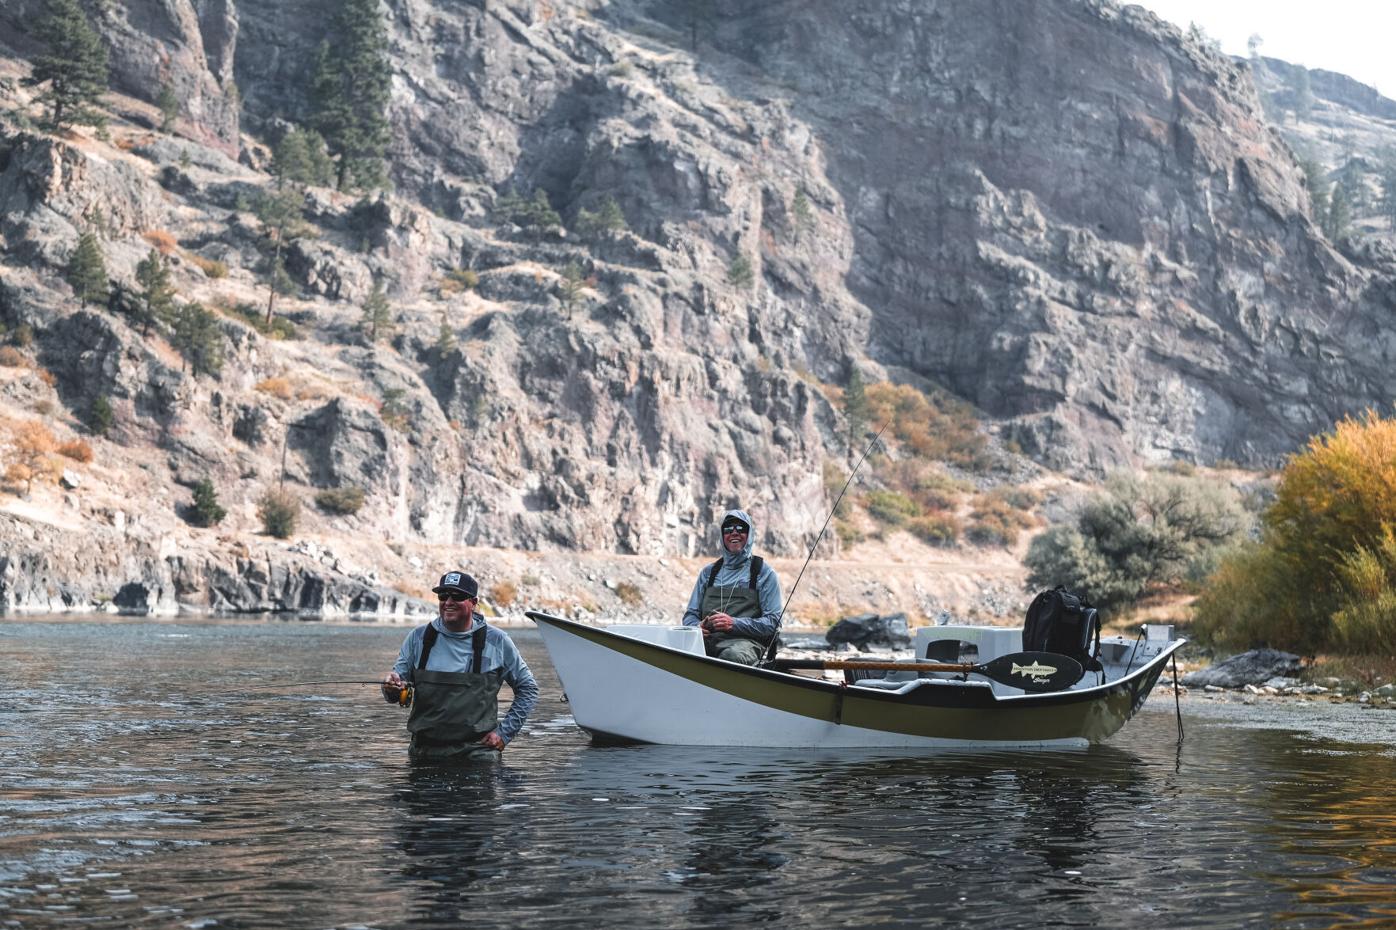 High-end fly-fishing apparel company launches in Bozeman